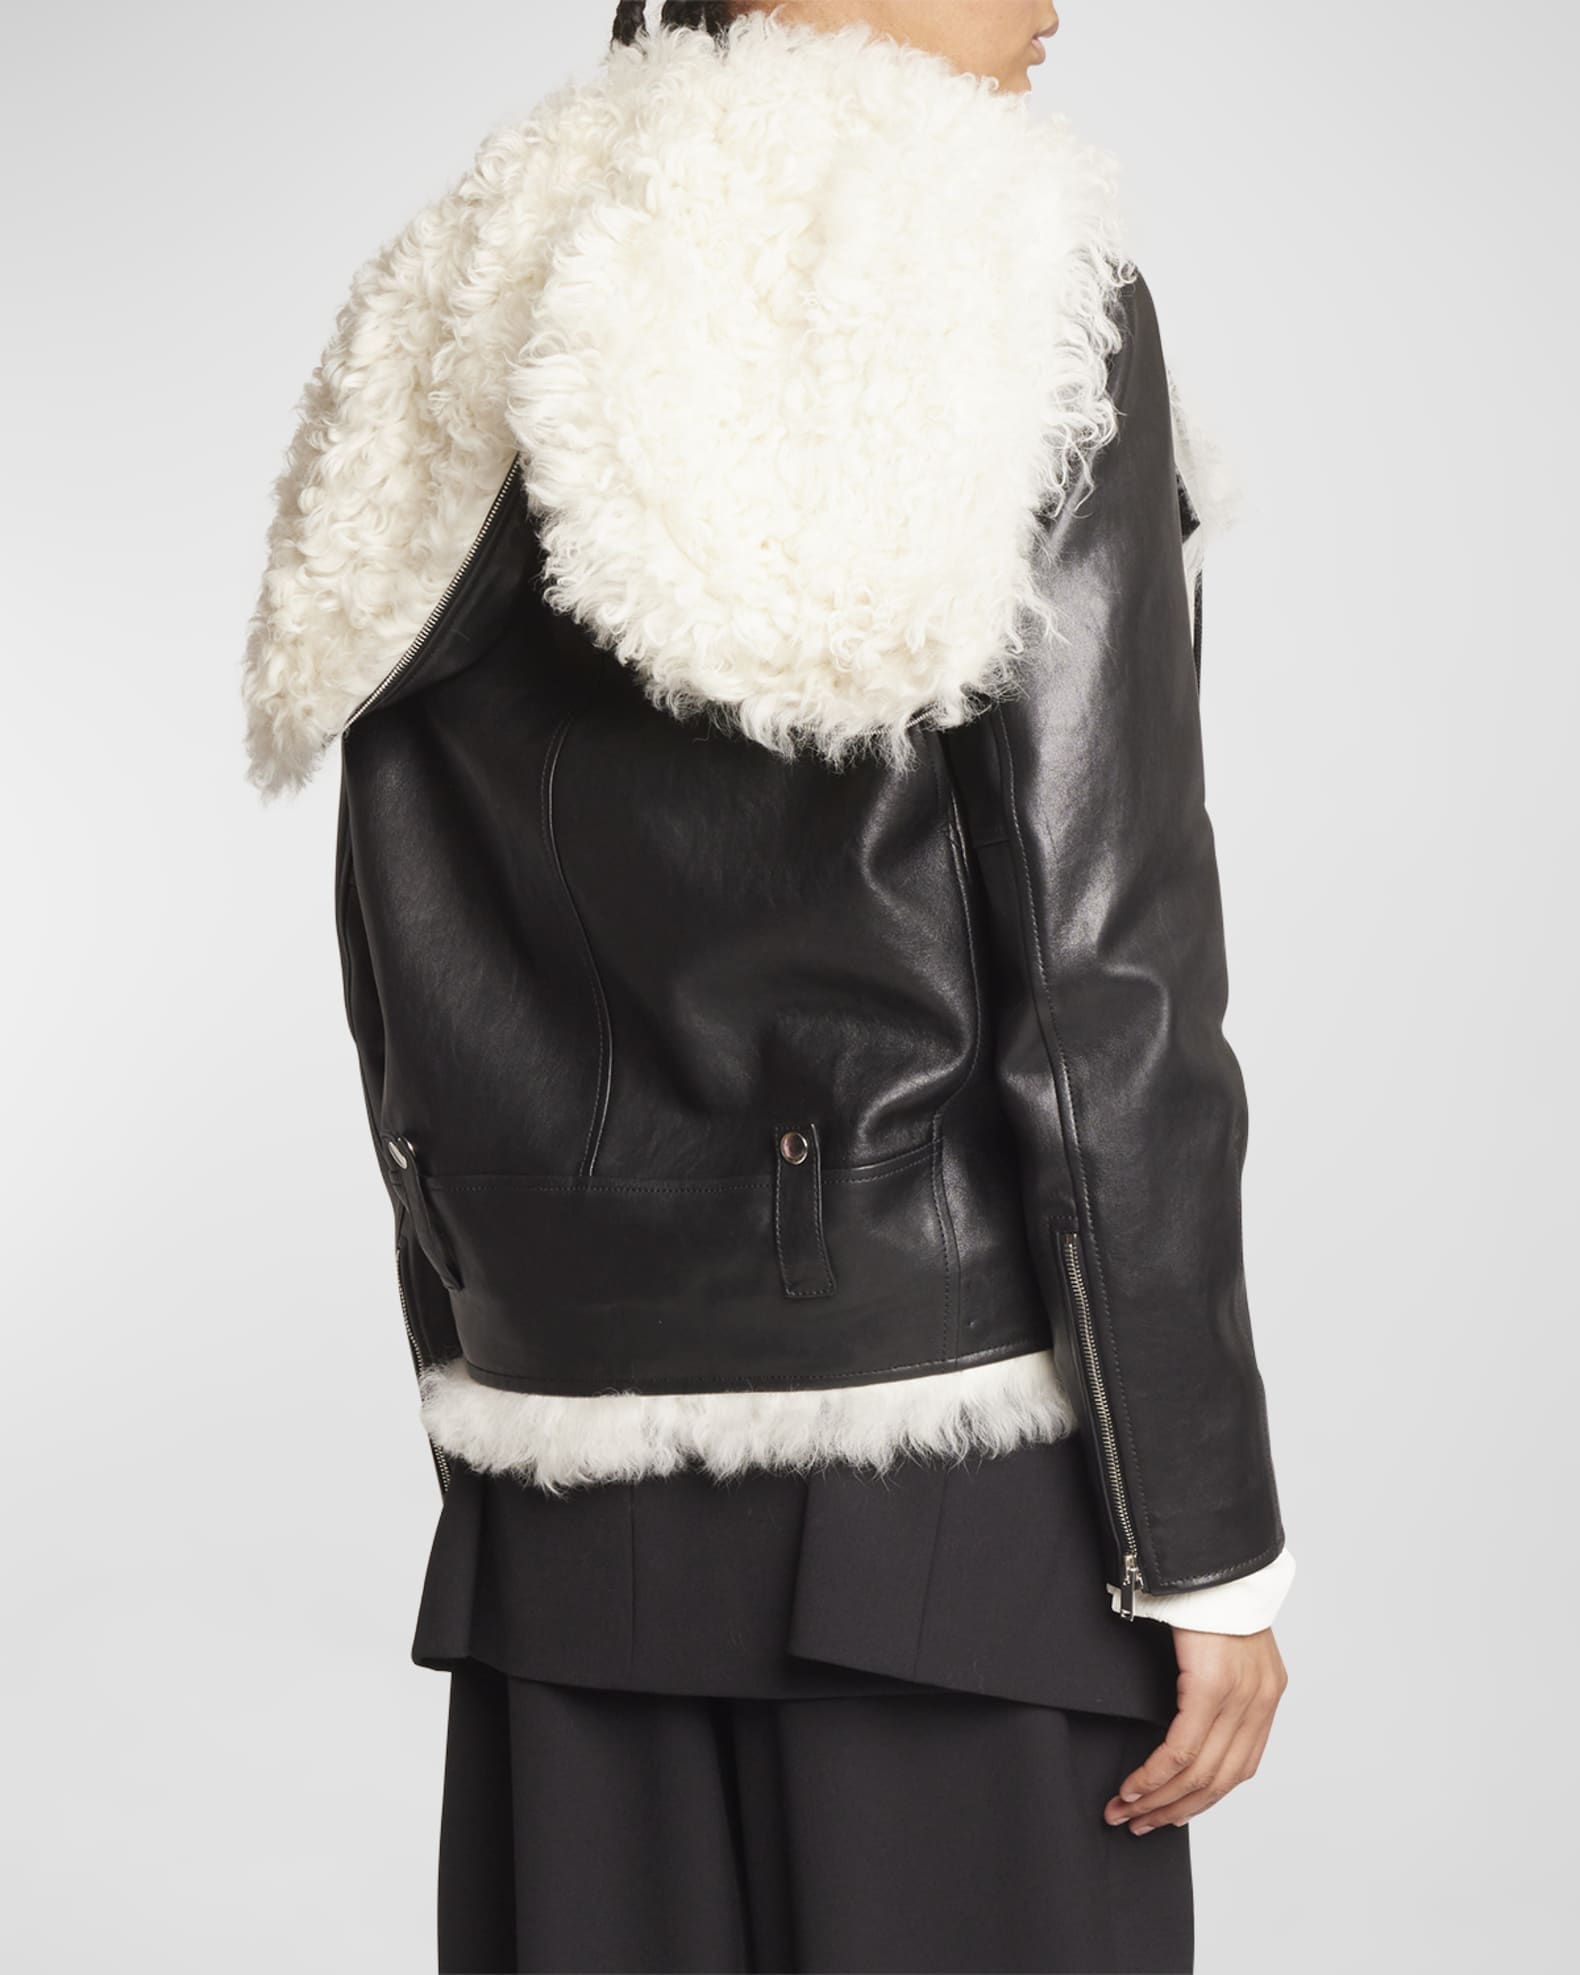 Proenza Schouler Leather Motorcycle Jacket with Shearling Lining ...